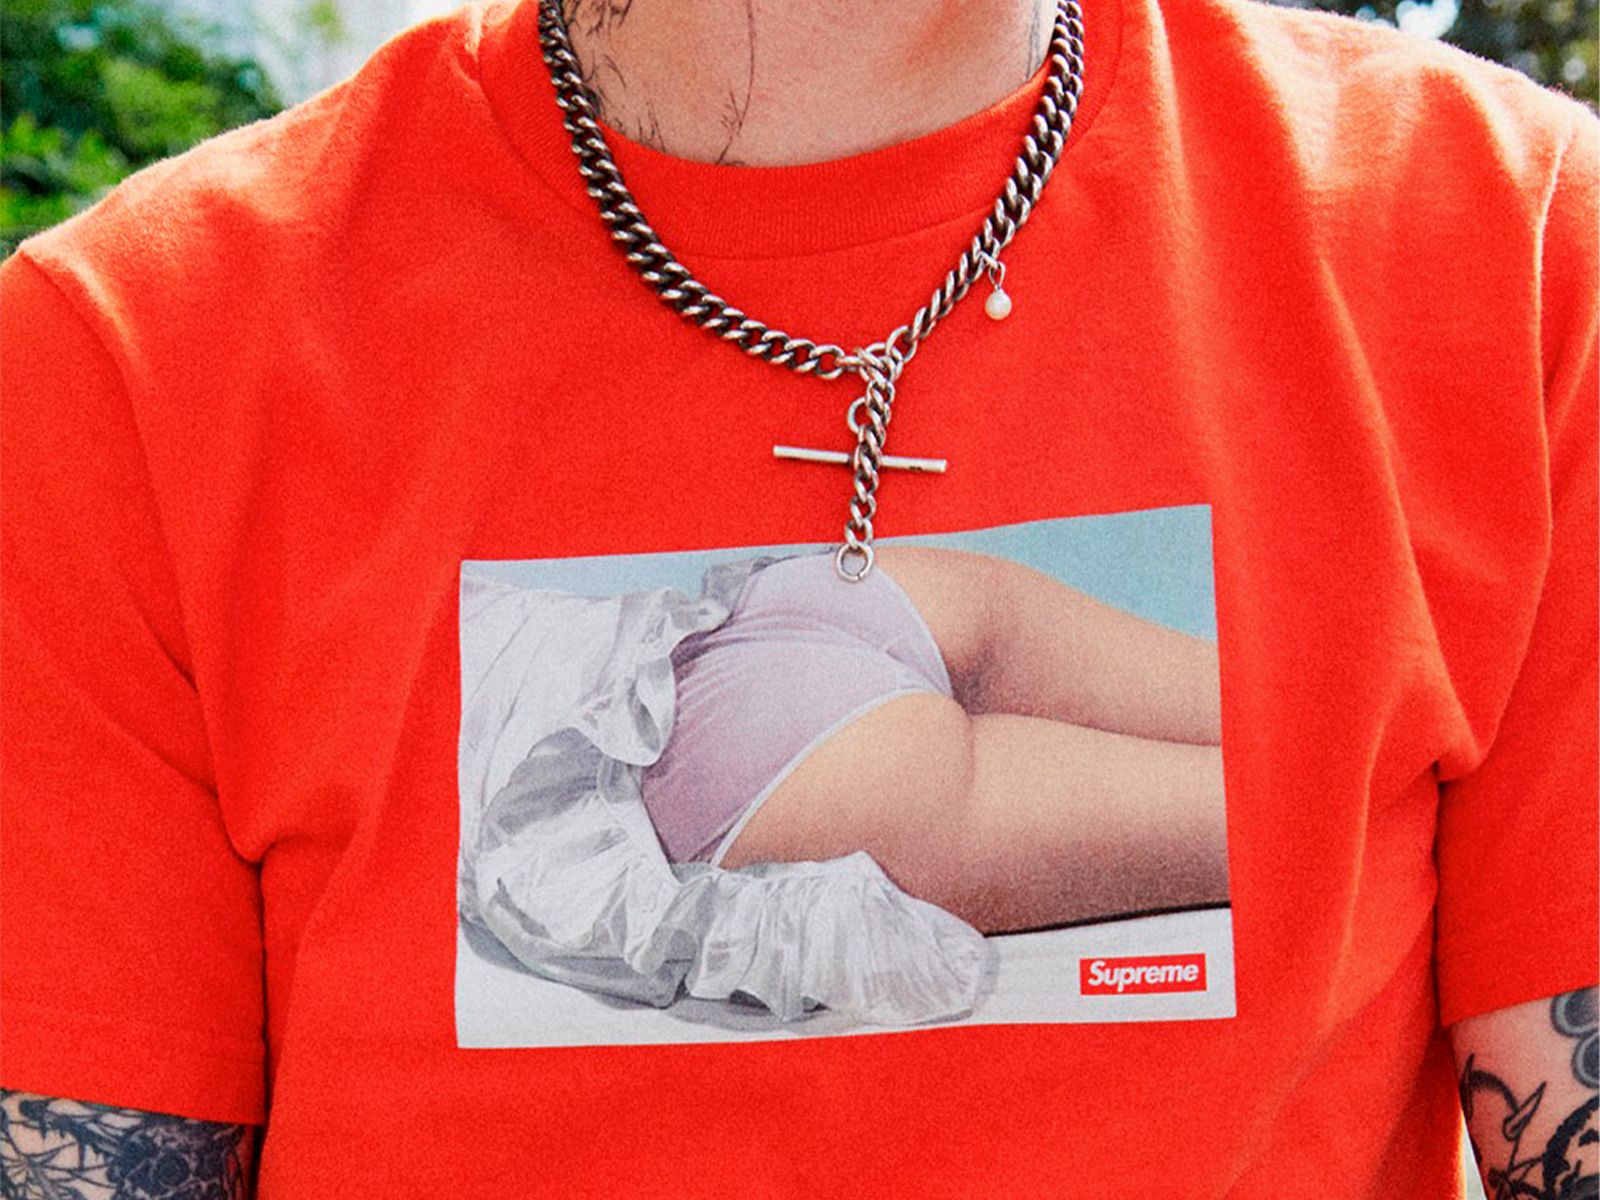 This is the Supreme Fall 2022 Tees selection